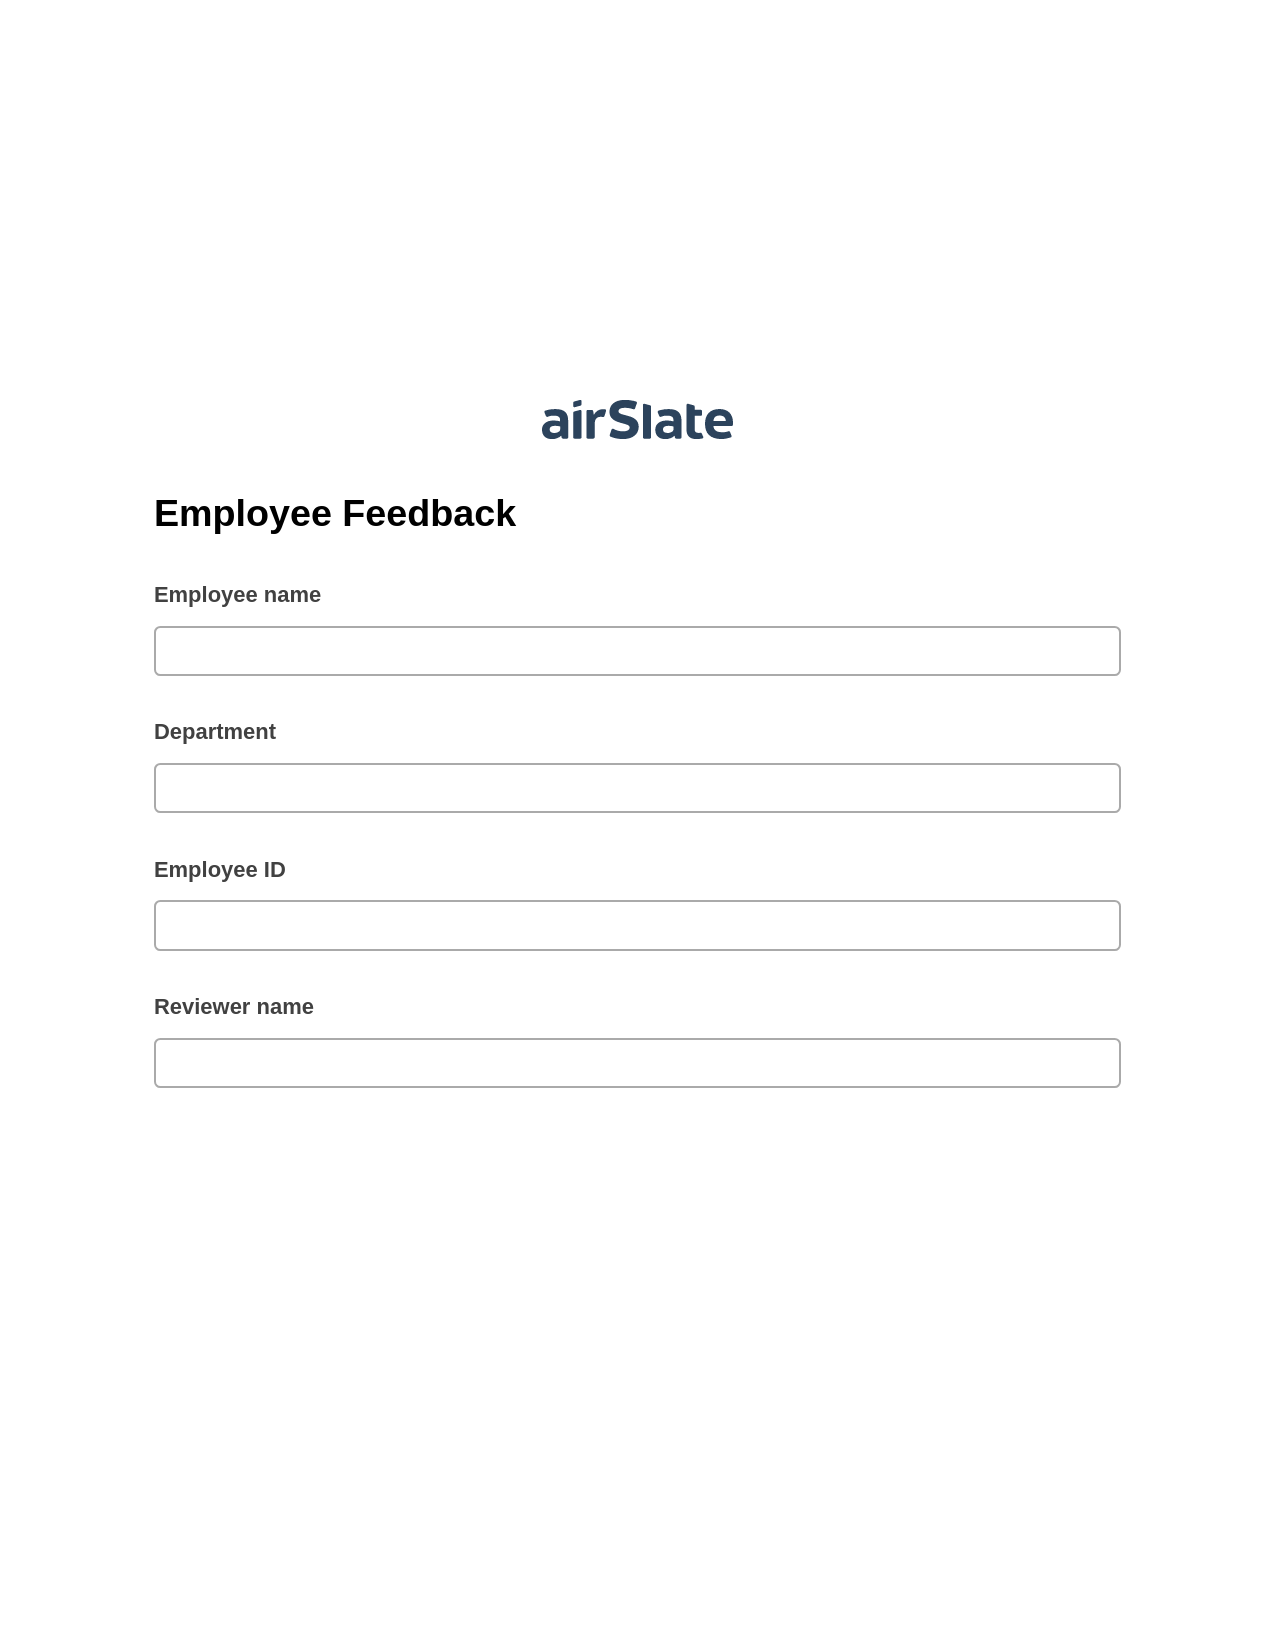 Multirole Employee Feedback Pre-fill from Google Sheet Dropdown Options Bot, Unassign Role Bot, Post-finish Document Bot